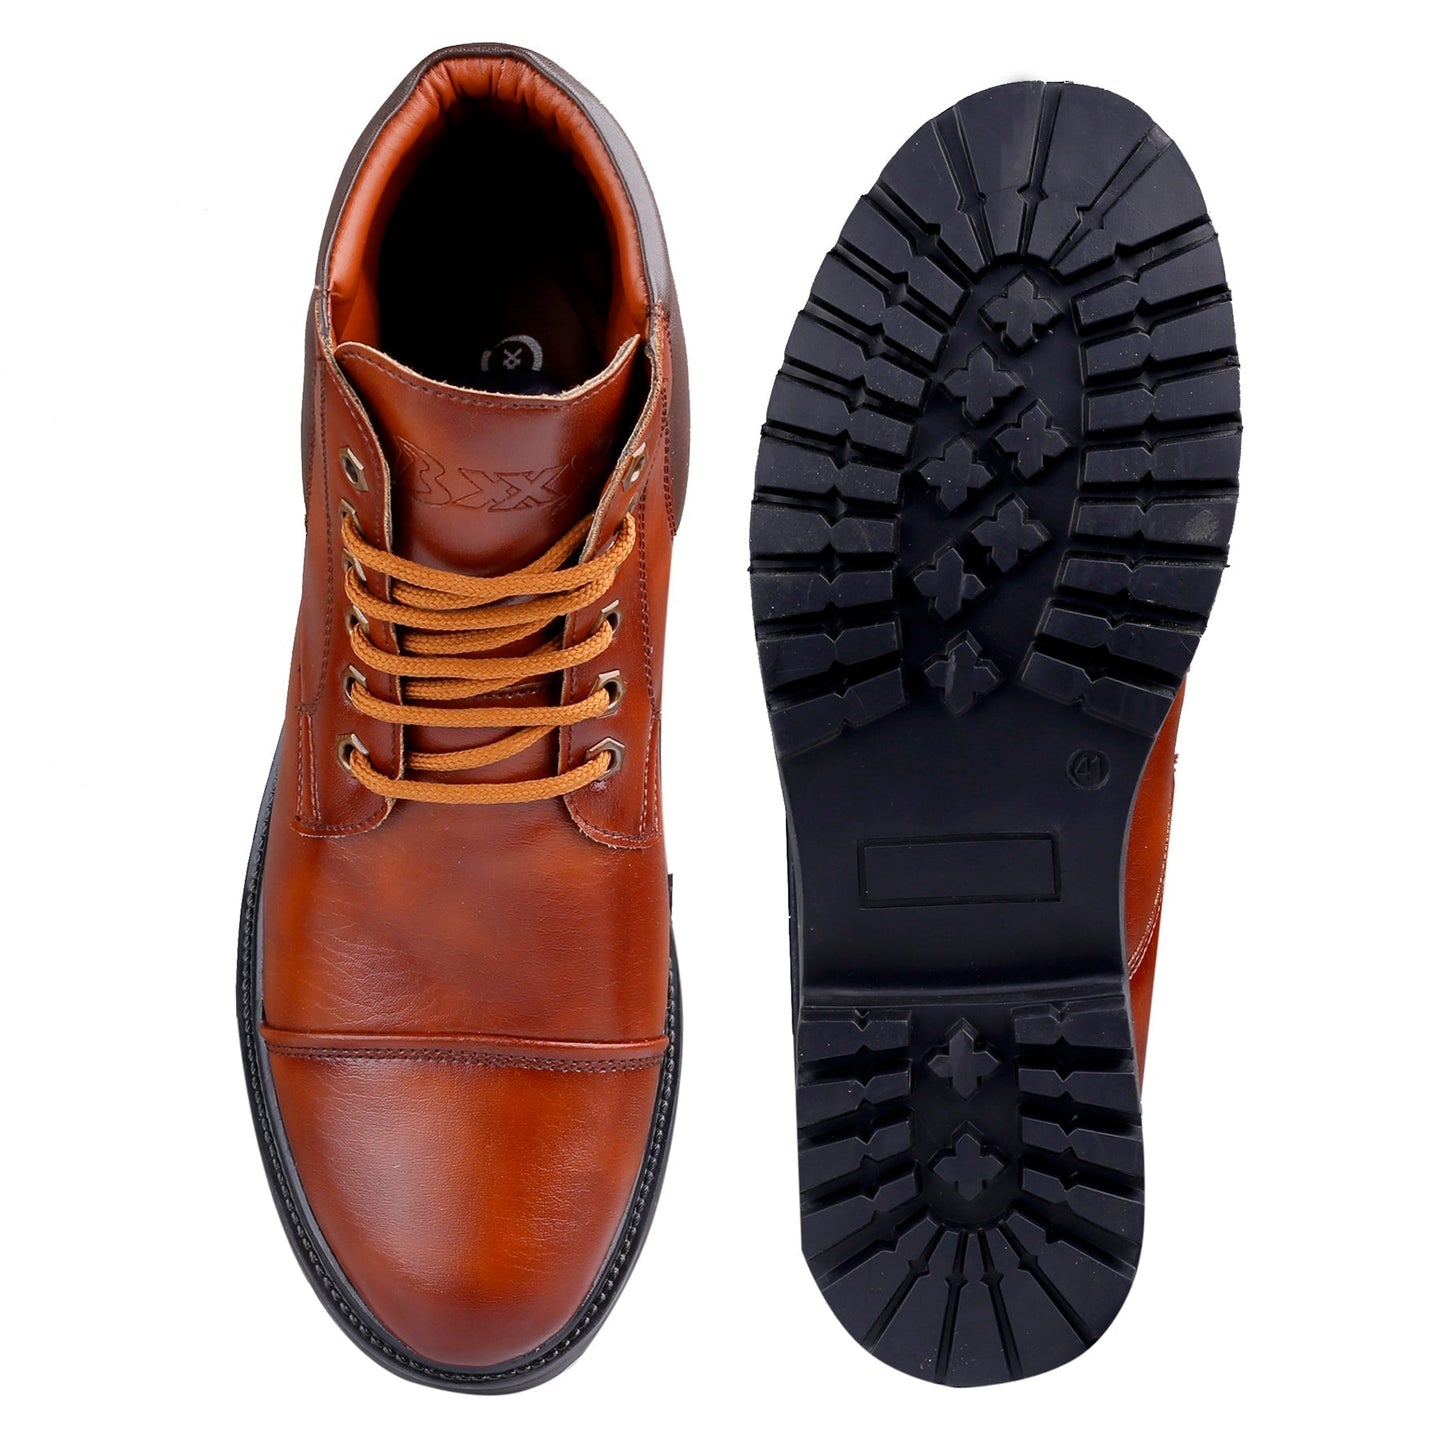 Bxxy's Faux Leather Lace-up Boots for Men